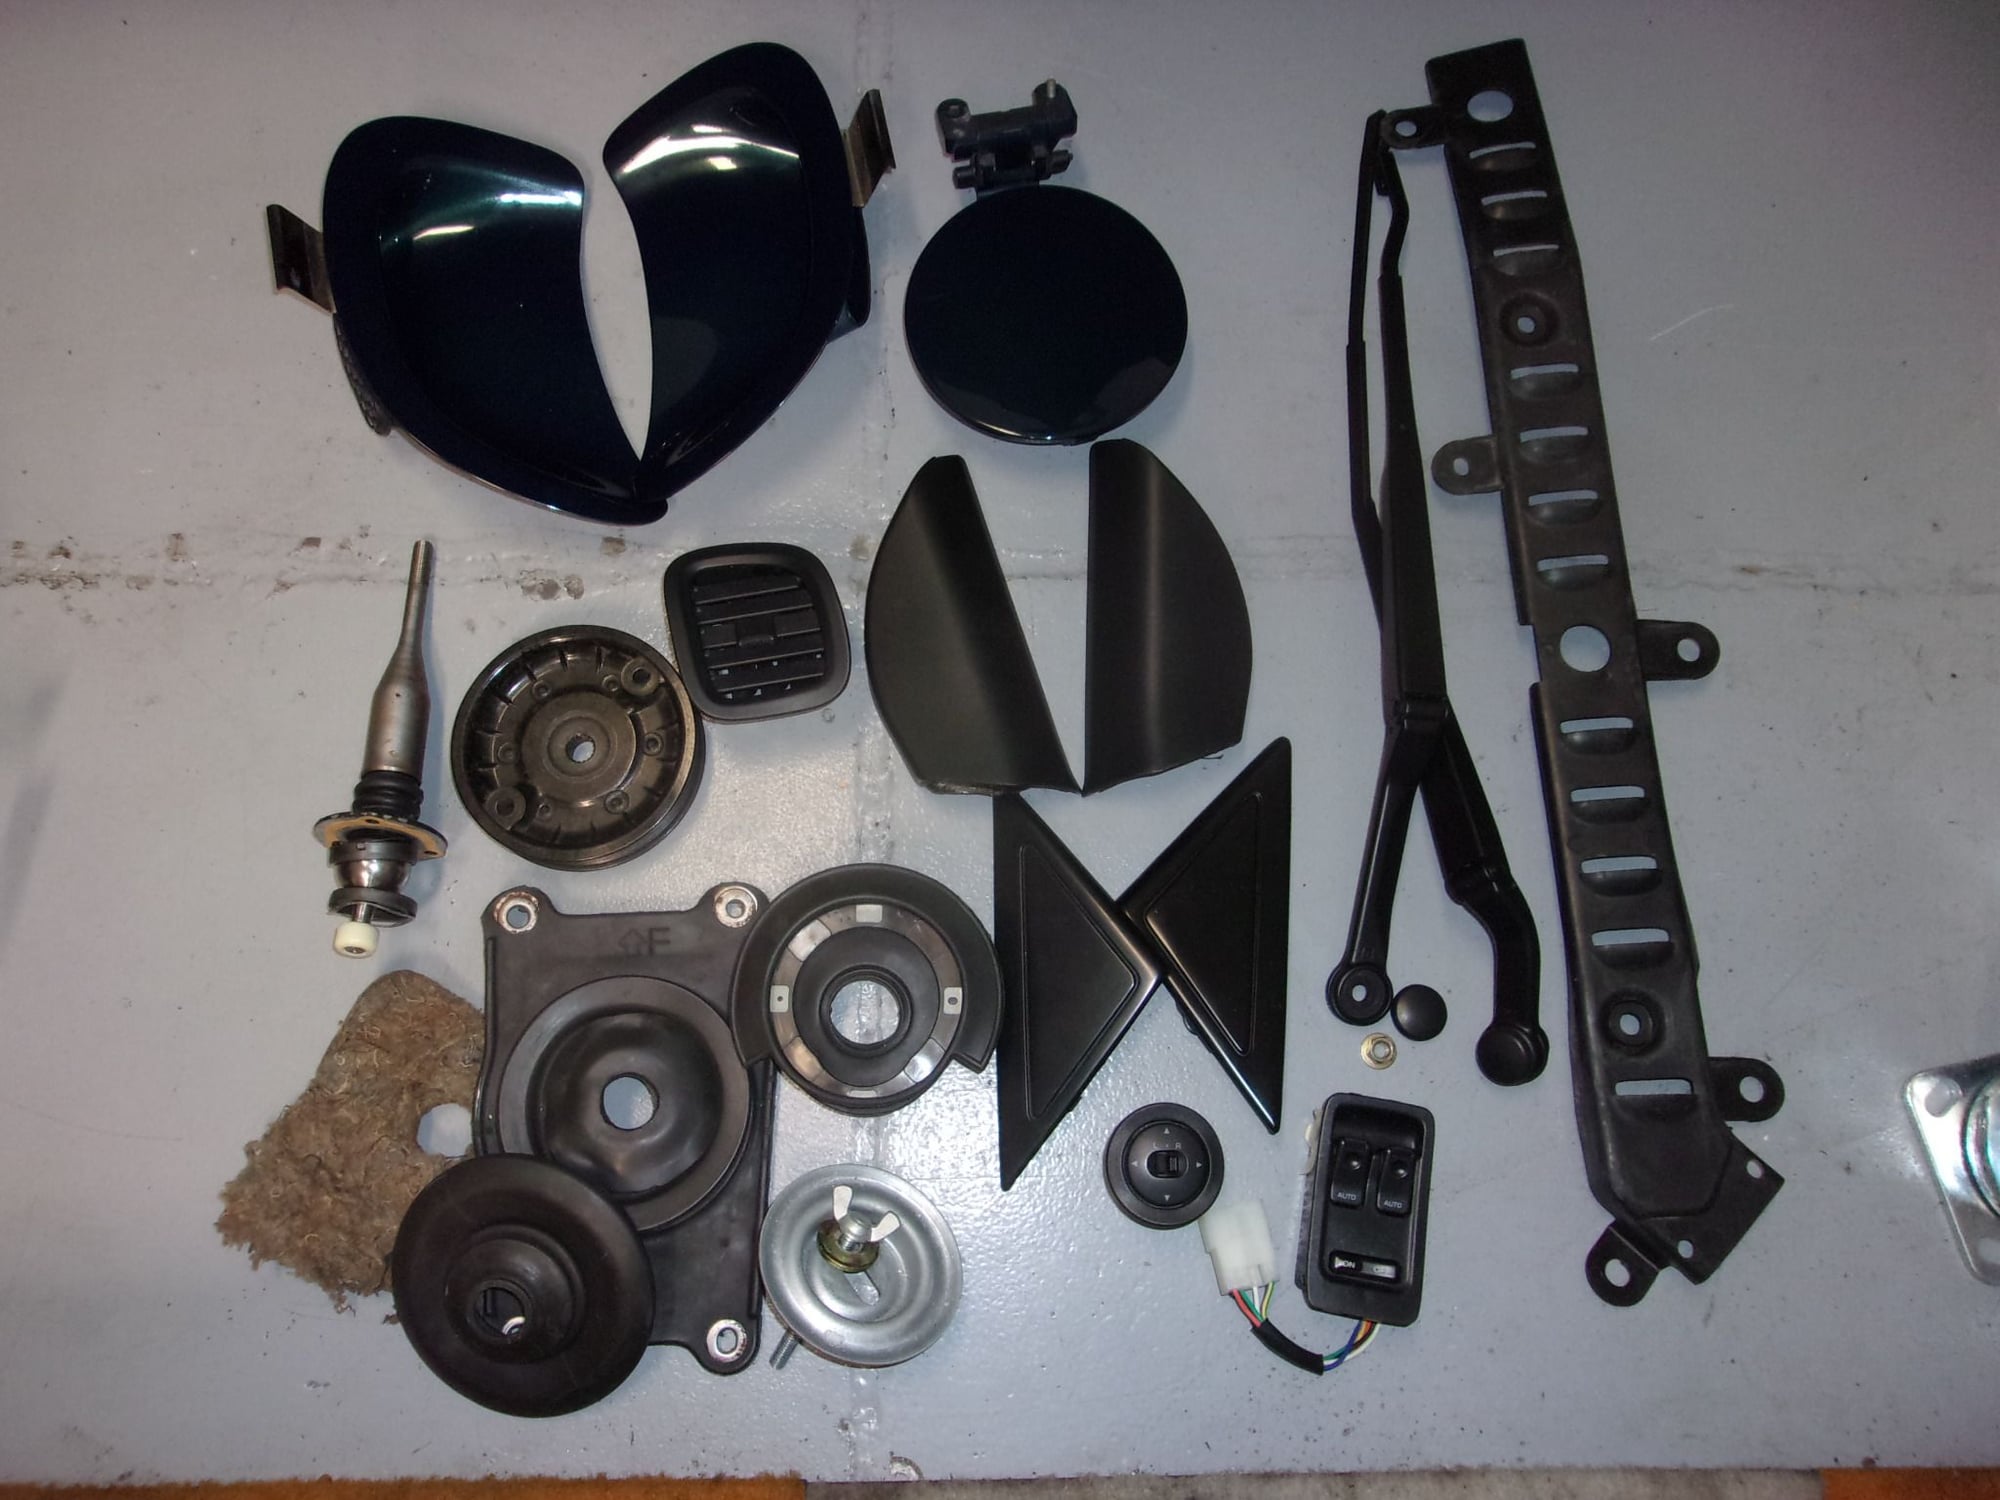 Miscellaneous - HARD-TO-FIND parts #12 - Used - 1993 to 2002 Mazda RX-7 - Murfreesboro, TN 37130, United States